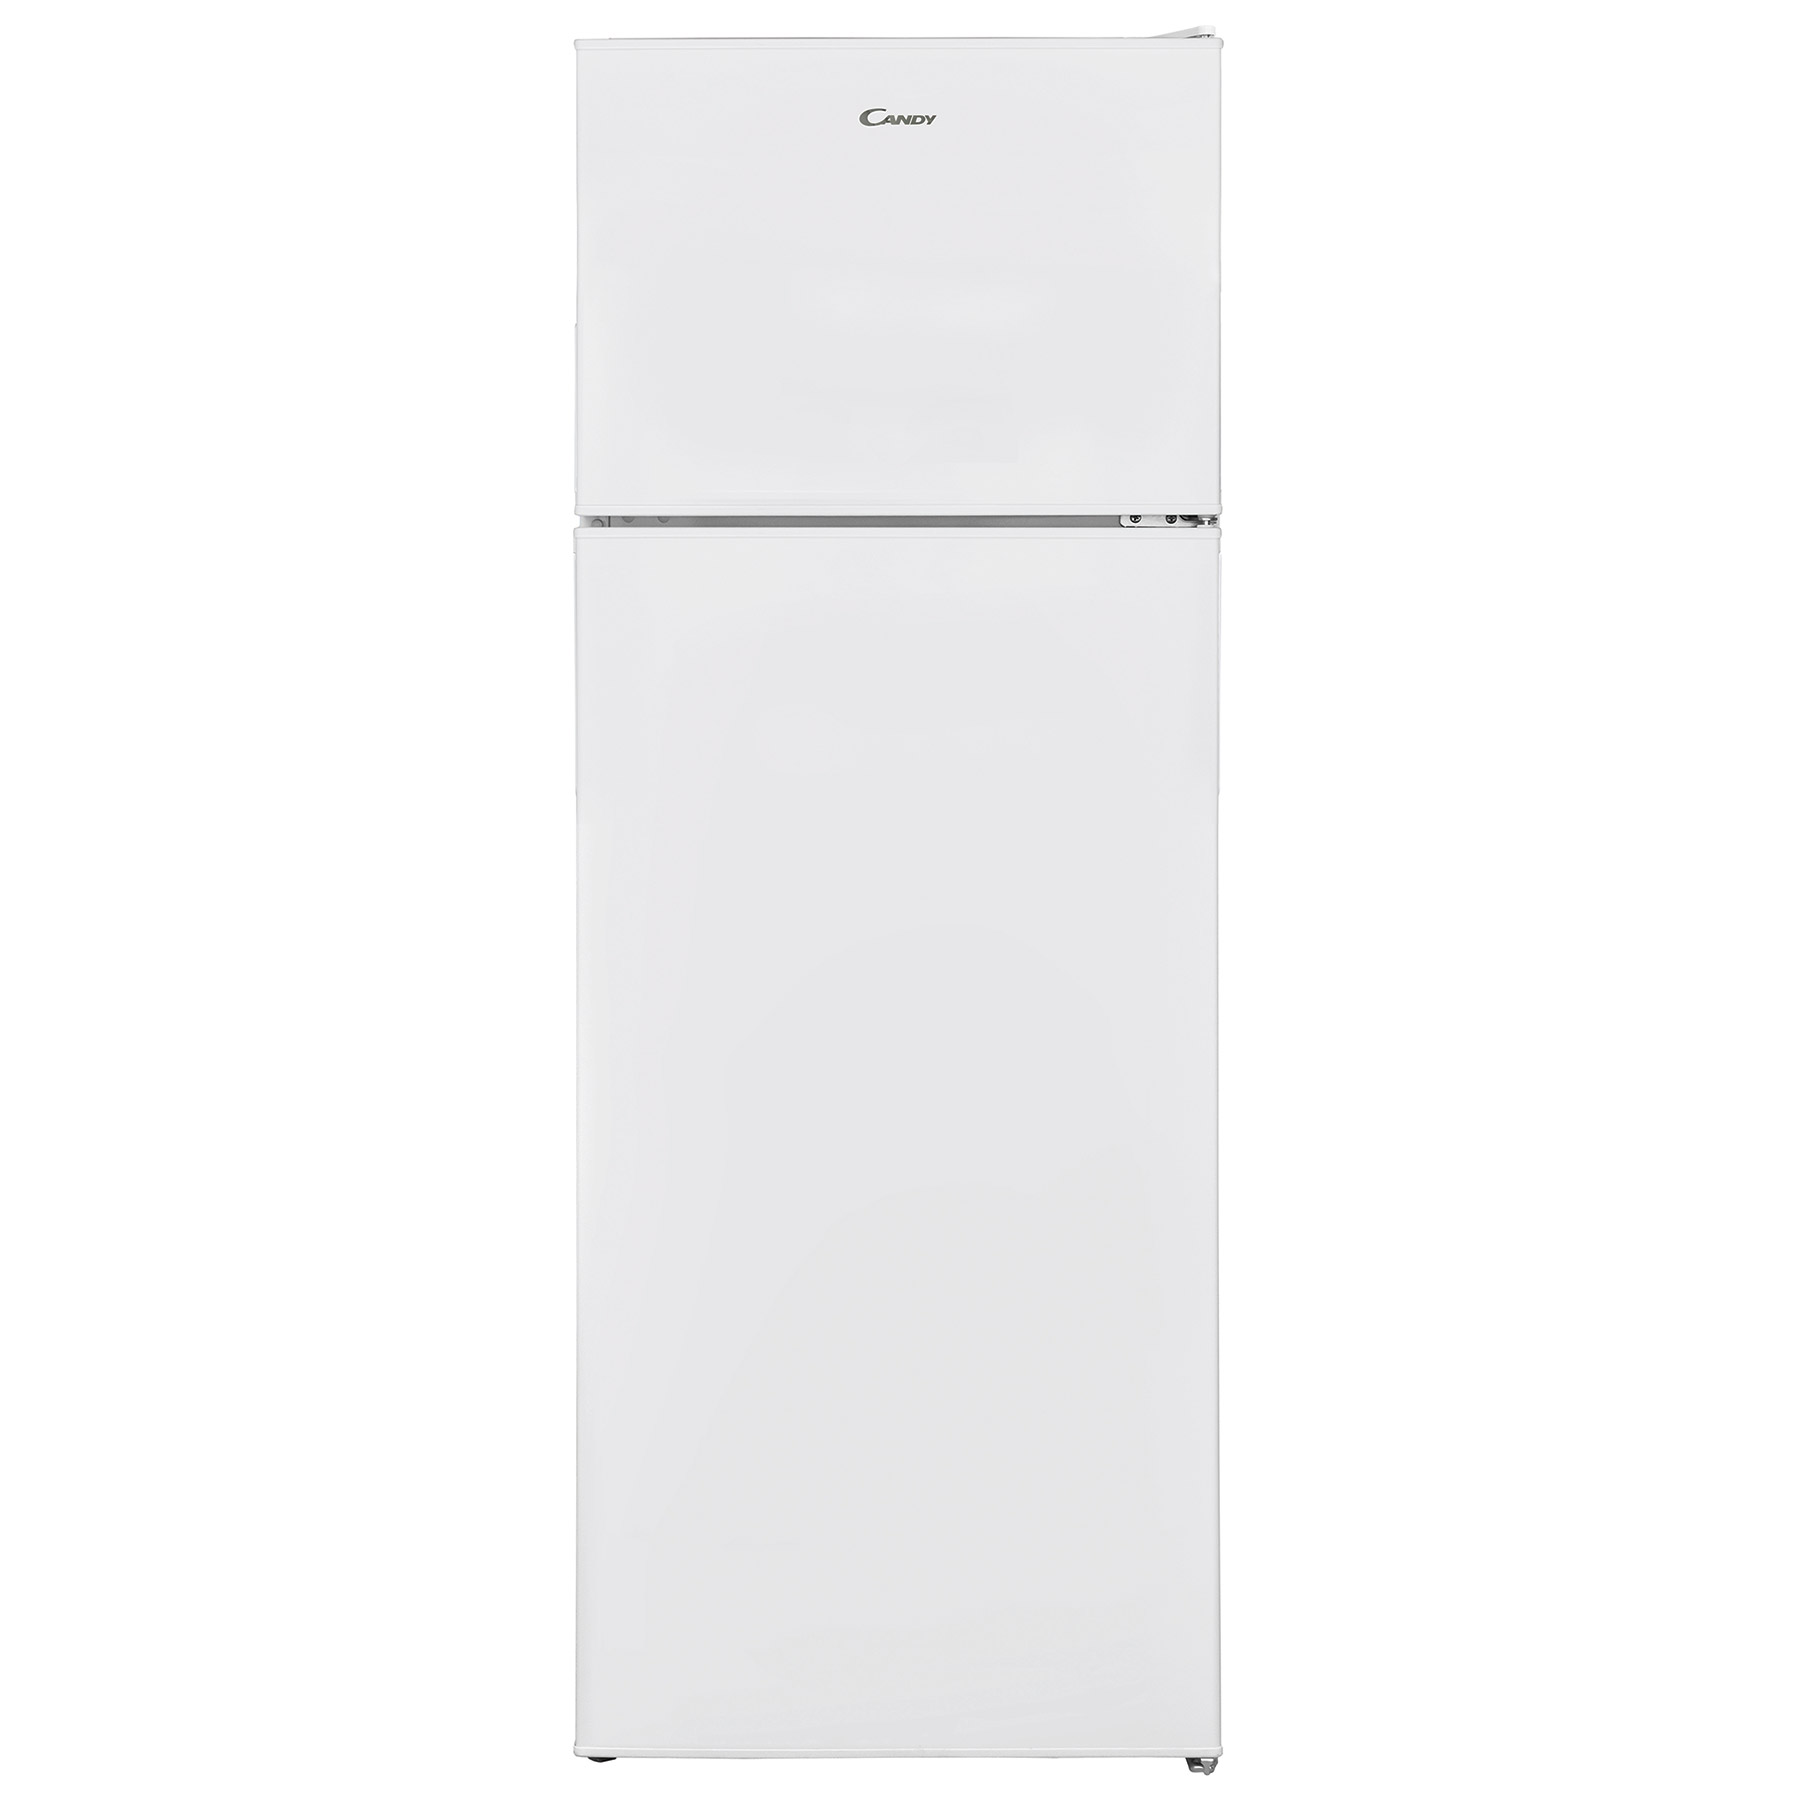 Candy CDV1S514FWK 55cm Top Mount Fridge Freezer in White 1 45m F Rated